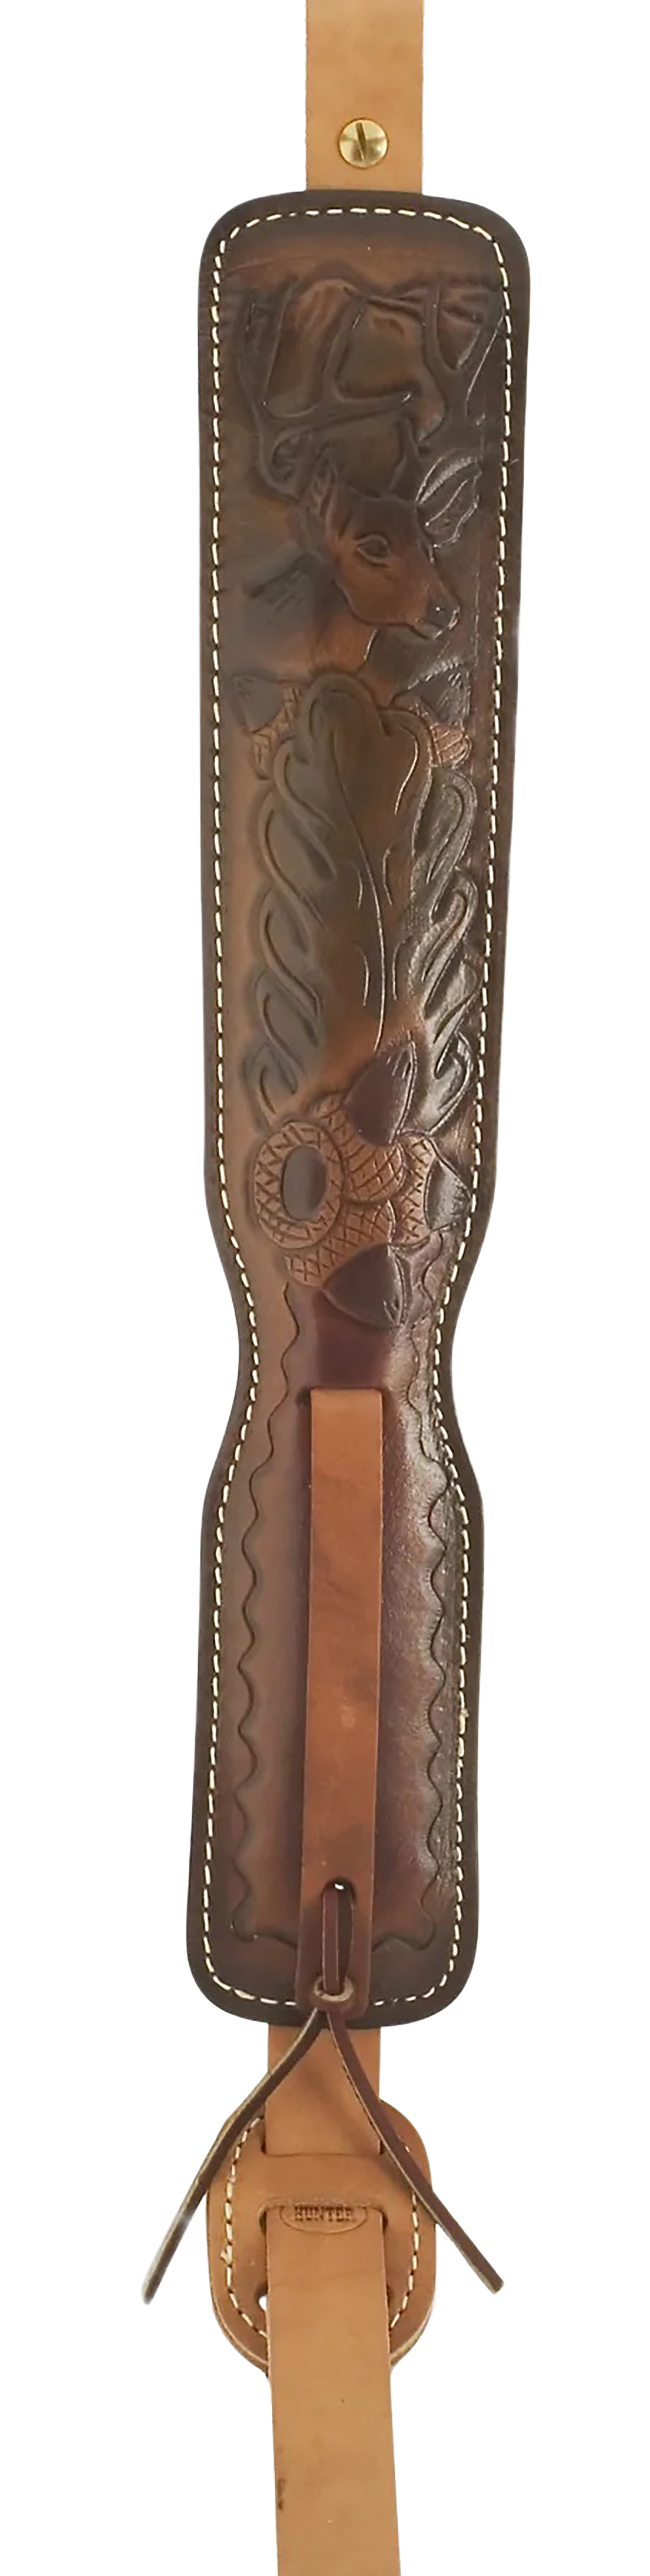 Hunter Company 027-25 Custom  Brown Leather/Suede with Deer & Acorn Design for Rifle